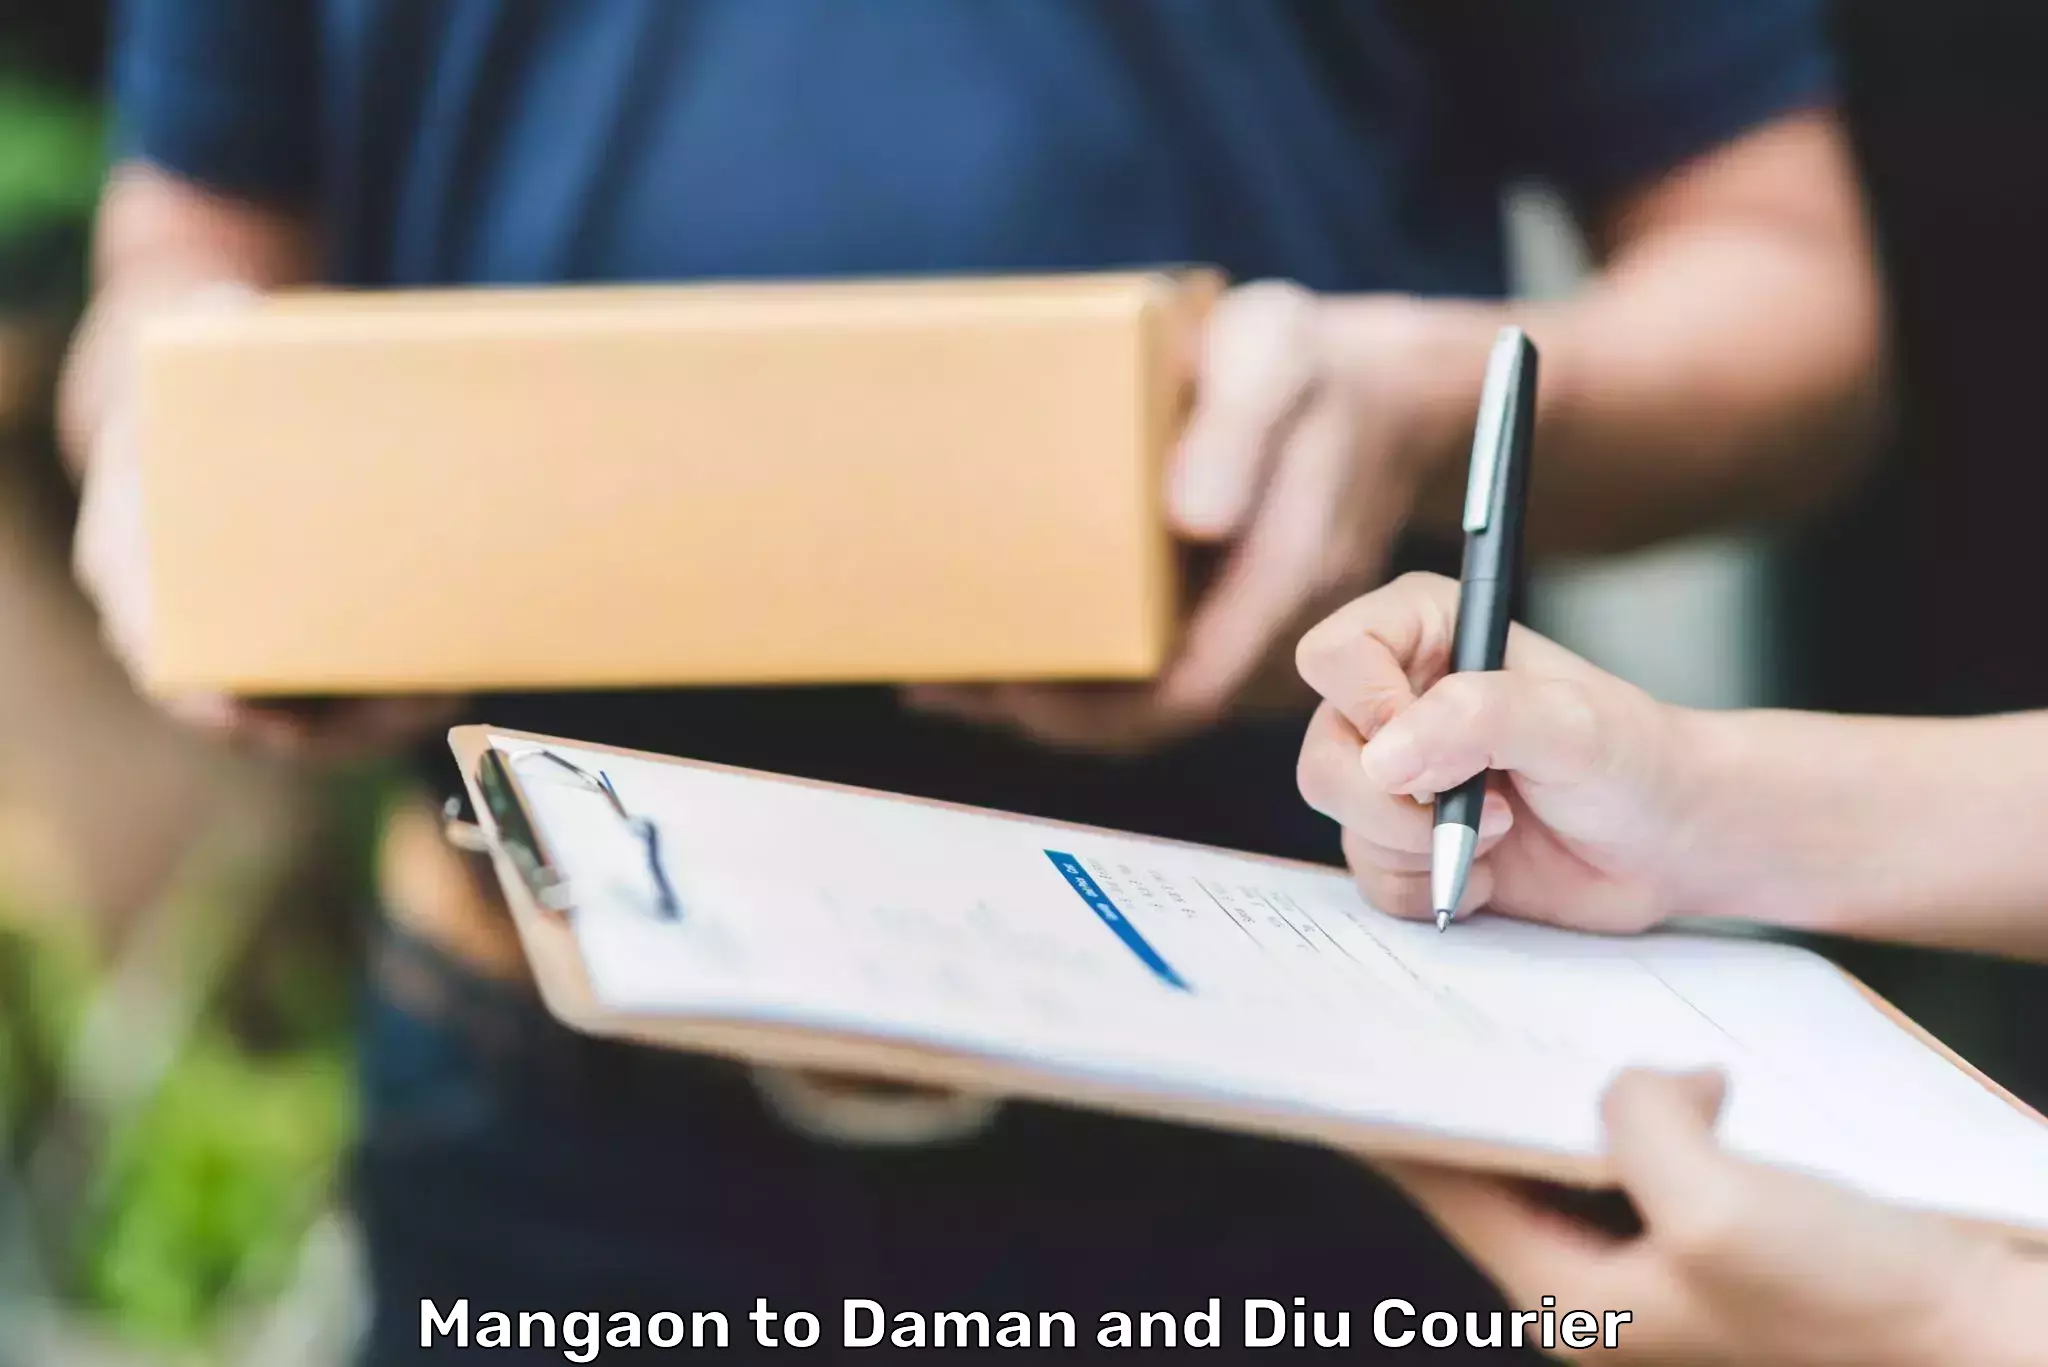 Courier service comparison Mangaon to Daman and Diu